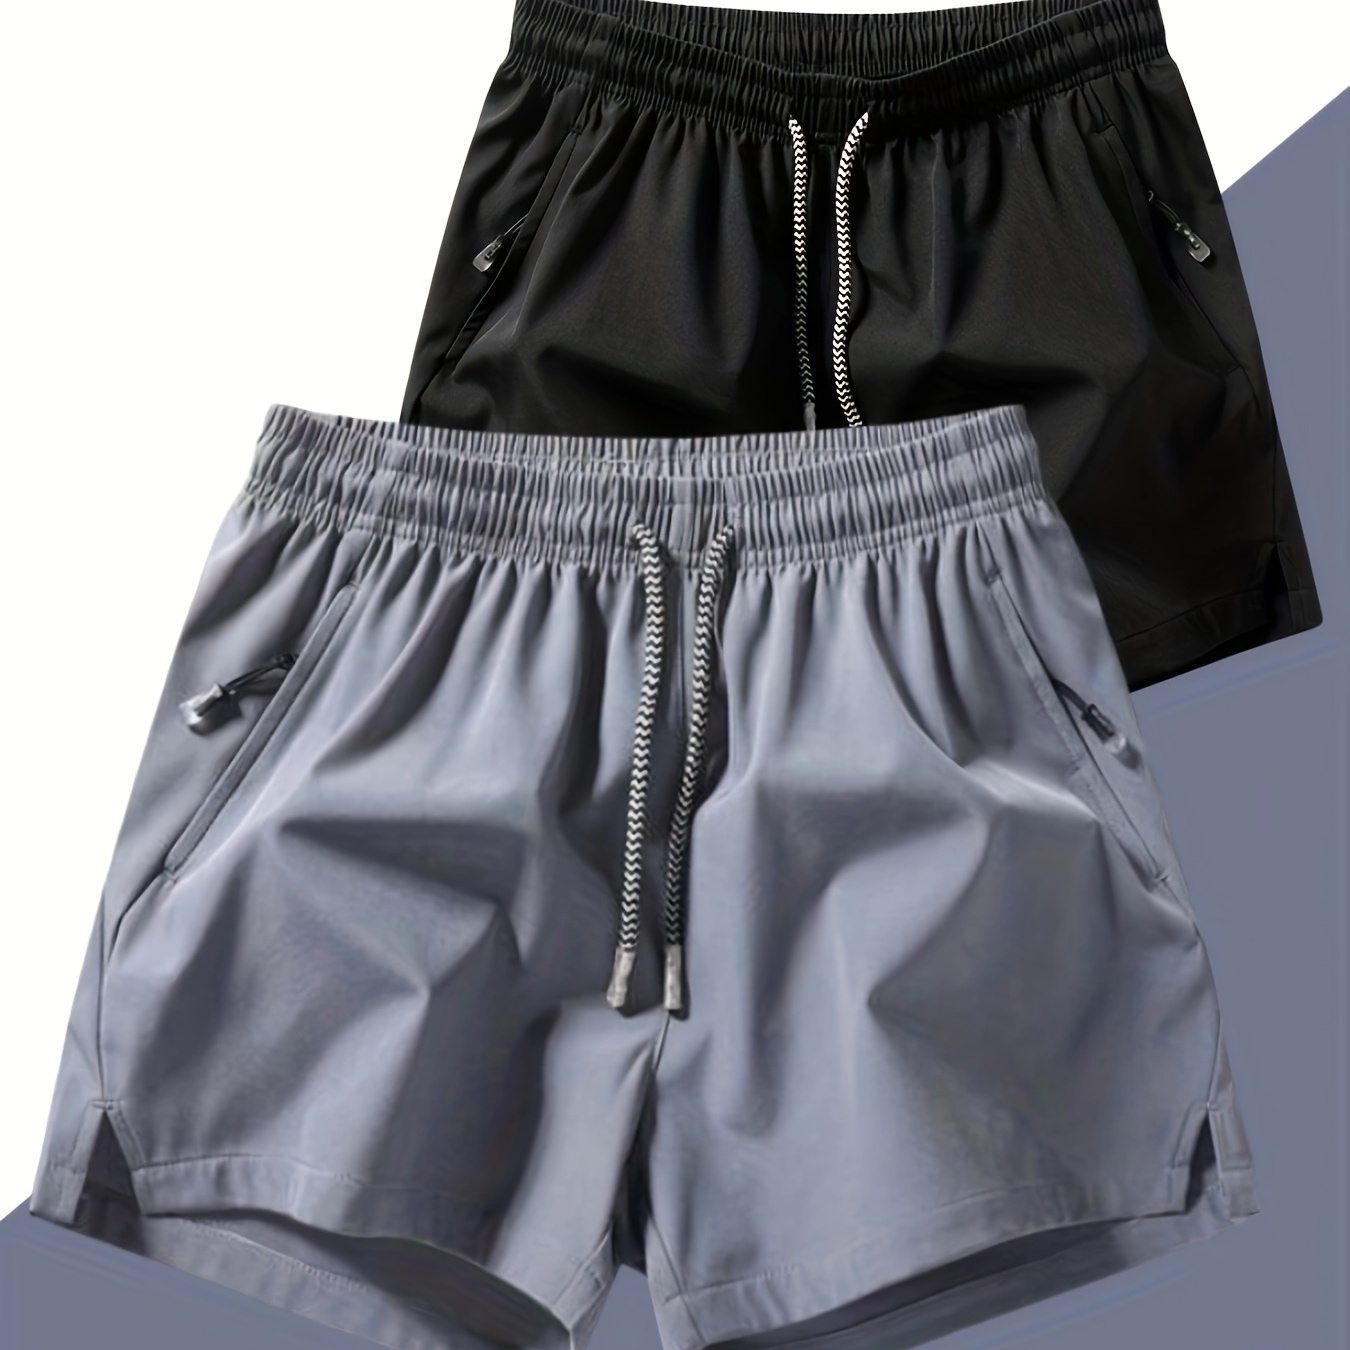 

Men's Two-piece Set Of Solid Color Sports Shorts With Drawstring And Dual Zippered Front Pockets, Casual And Chic Shorts Suitable For Summer Fitness And Outdoors Wear